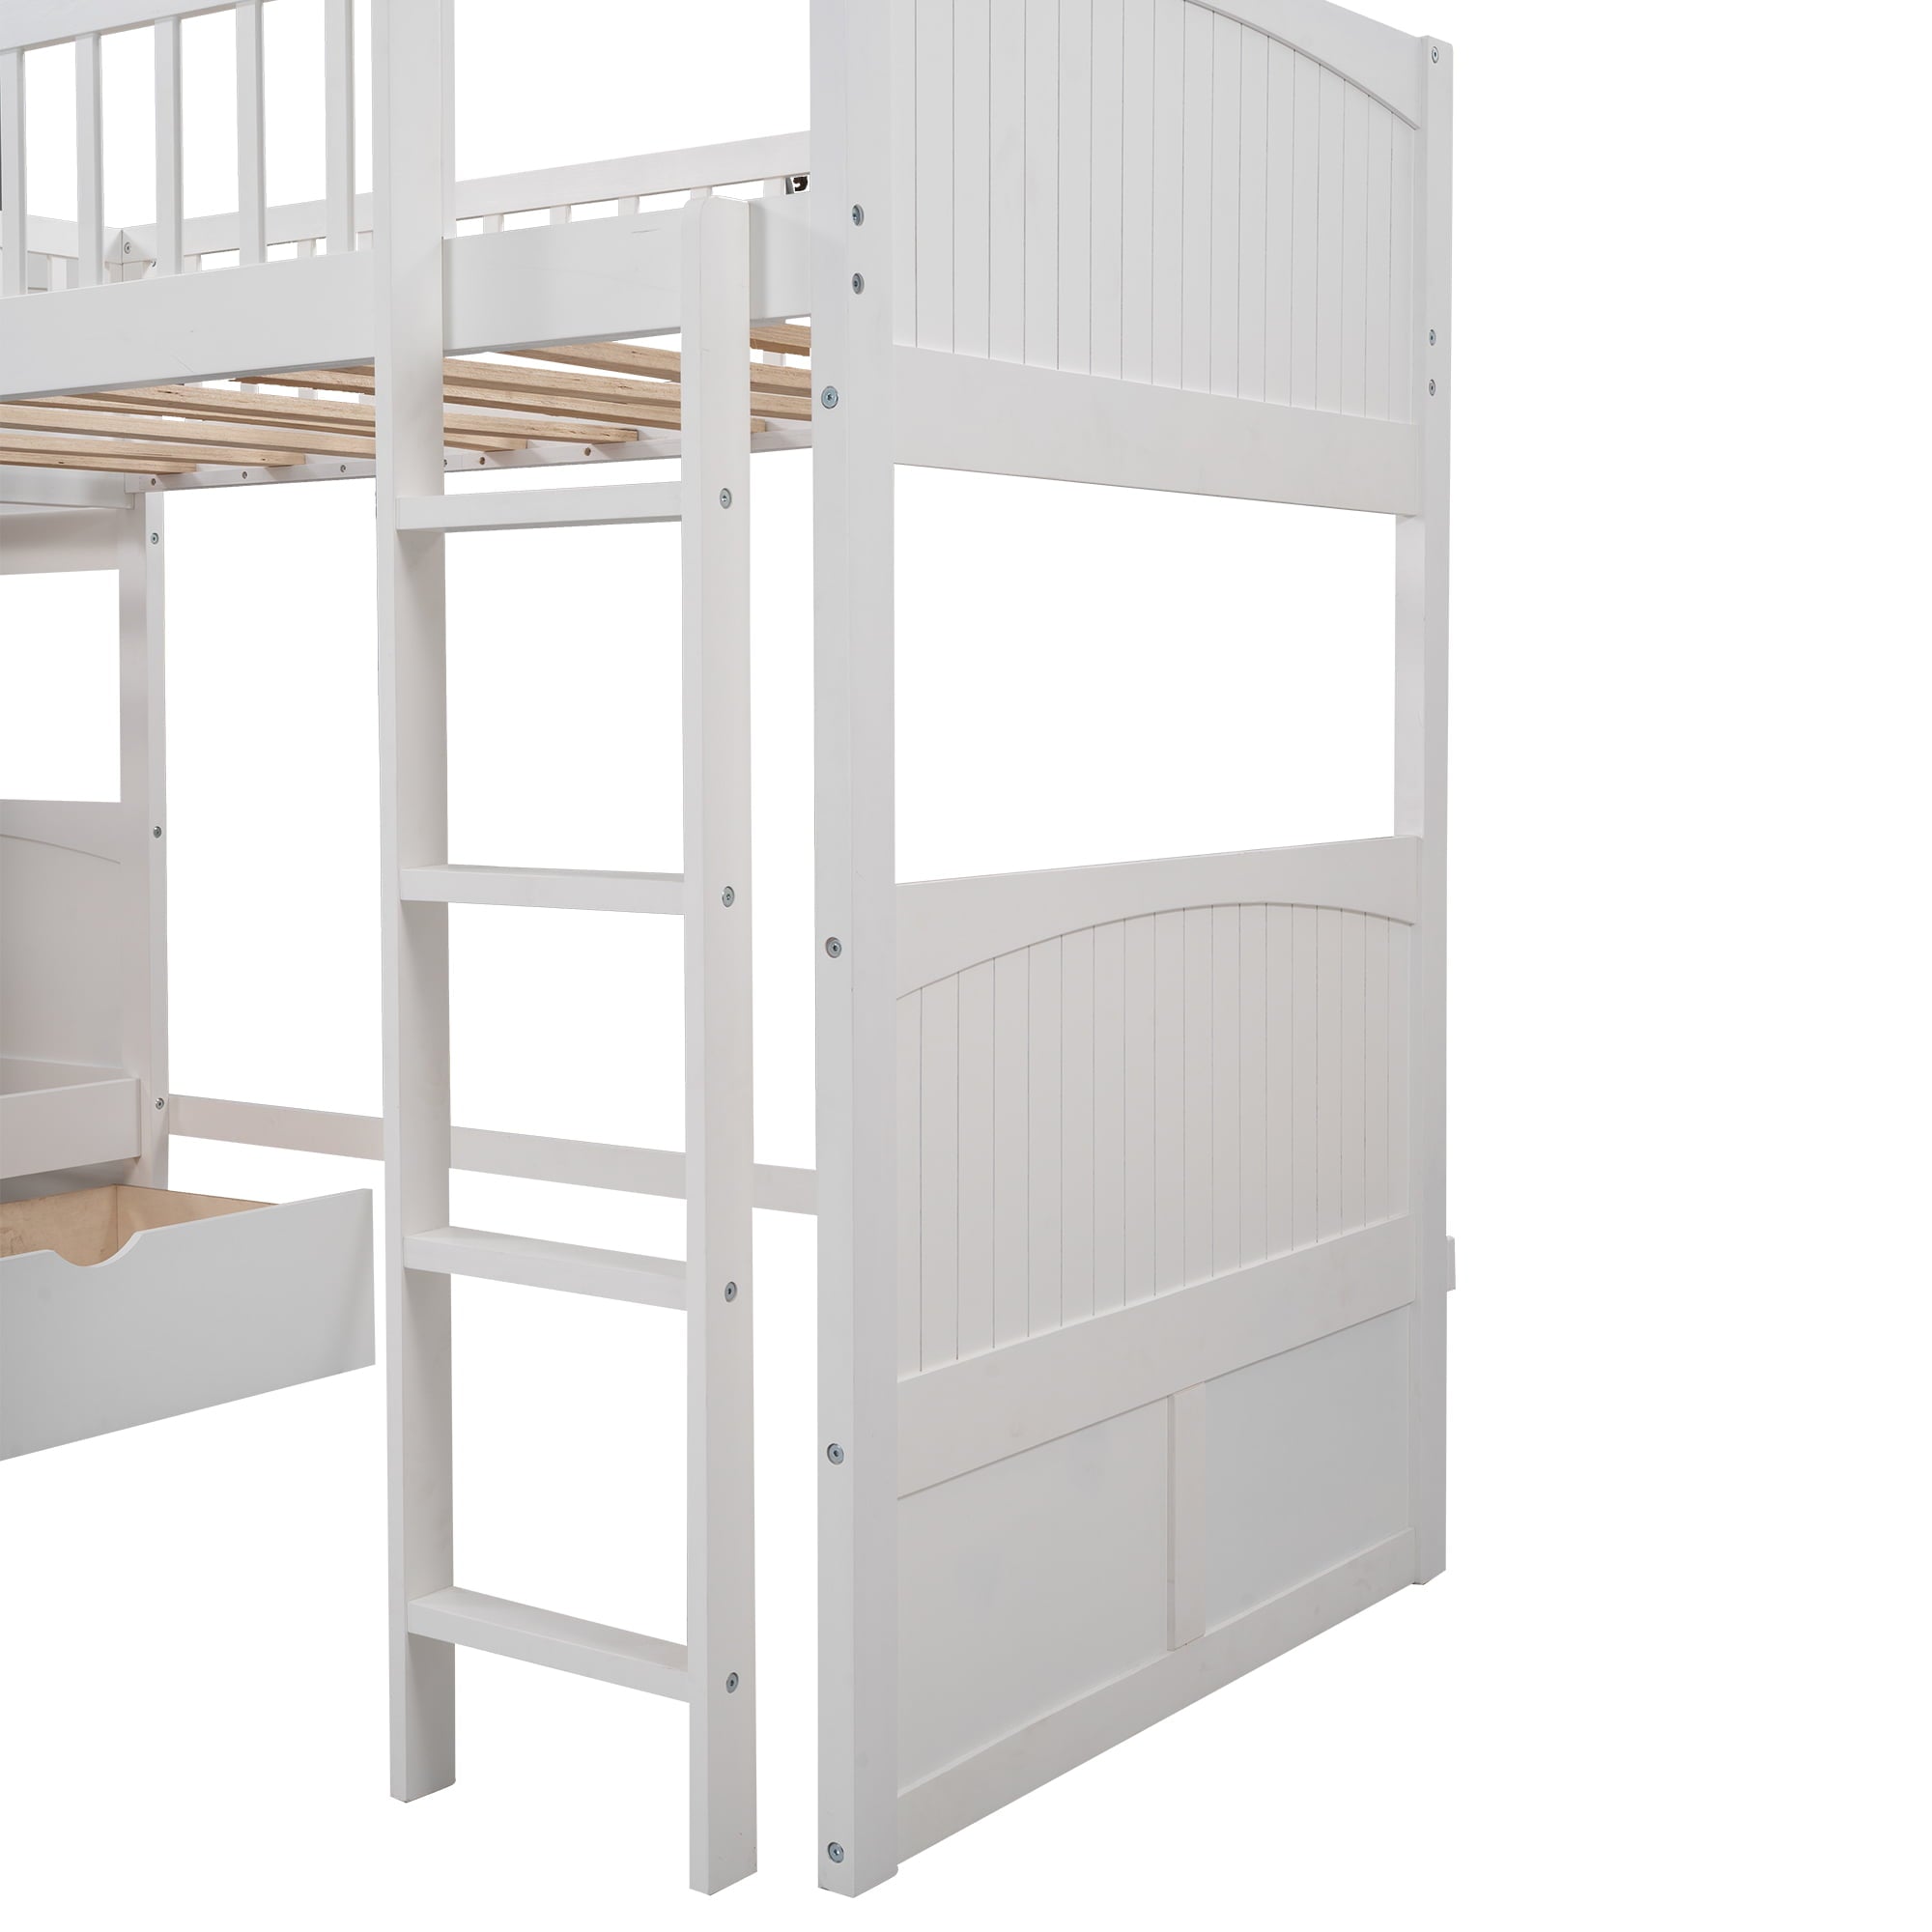 Euroco Wood Bunk Bed Storage, Twin-over-Twin-over-Twin for Children's Bedroom, White